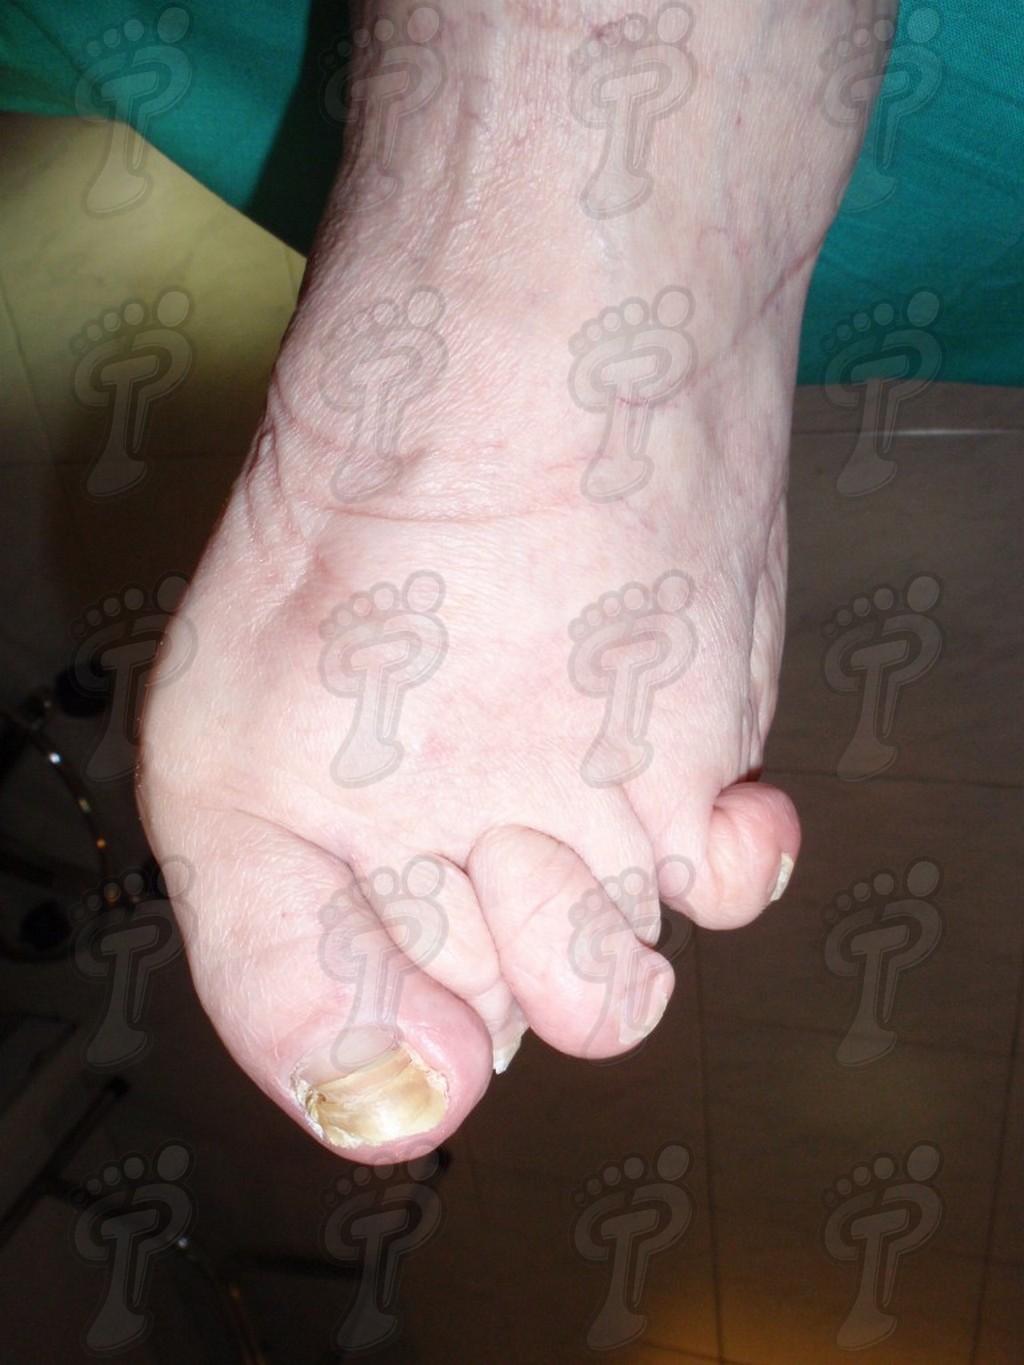 Overview of the rheumatoid foot